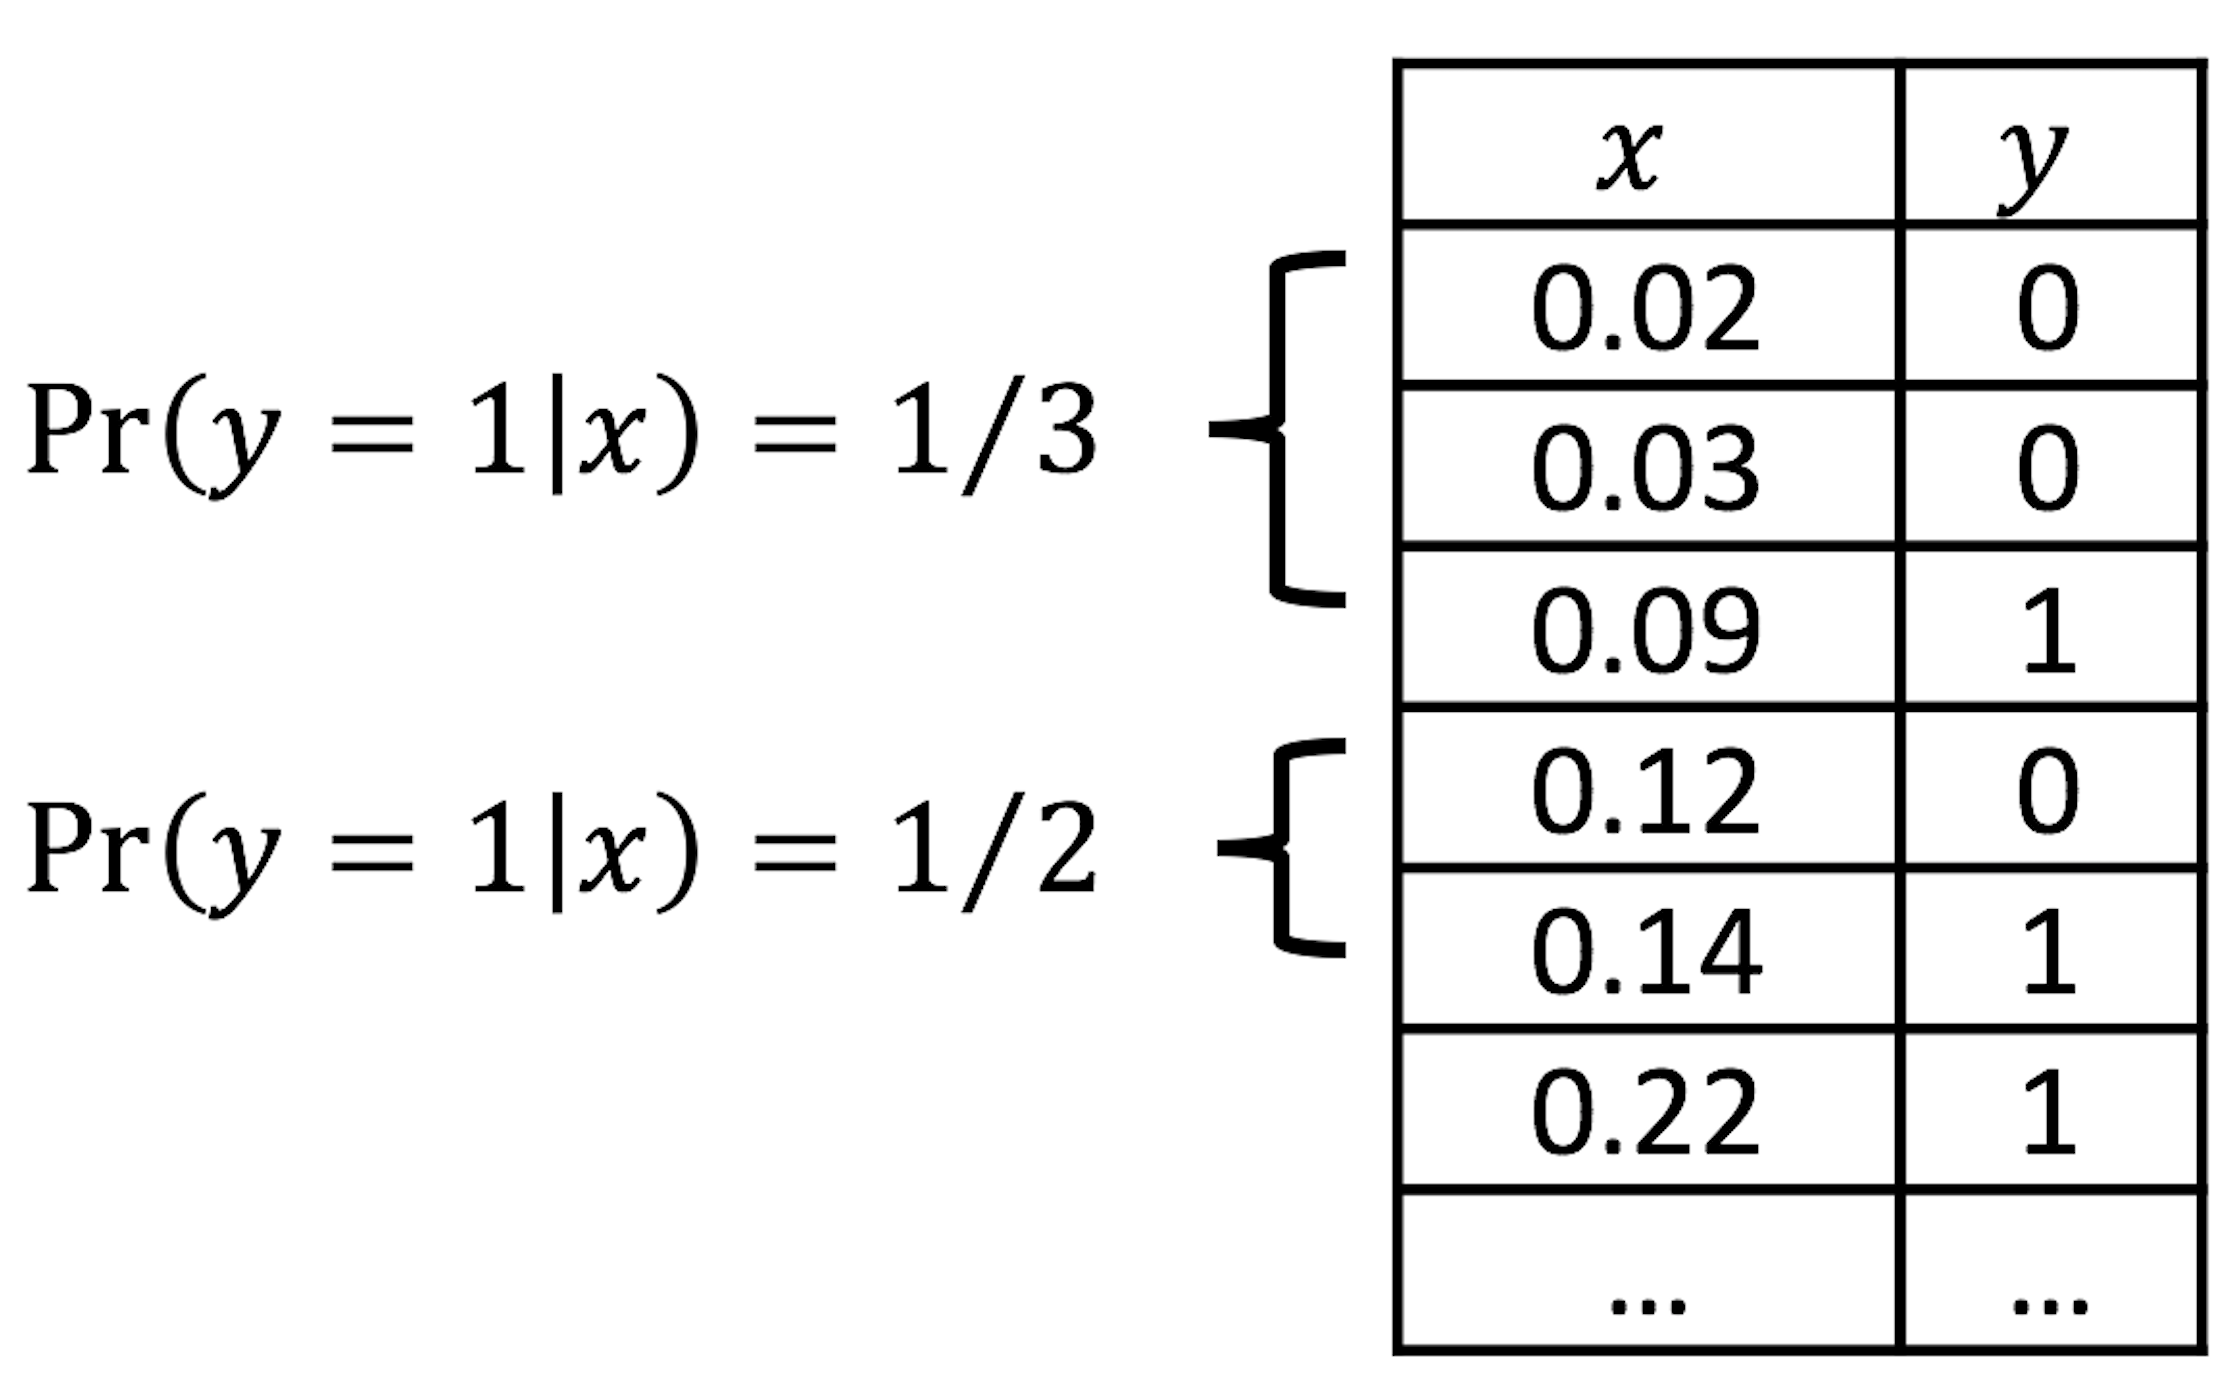 Illustration of the discretization process, e.g., two categories ($0.0-0.1$ and $0.1-0.2$) of $x$ are shown